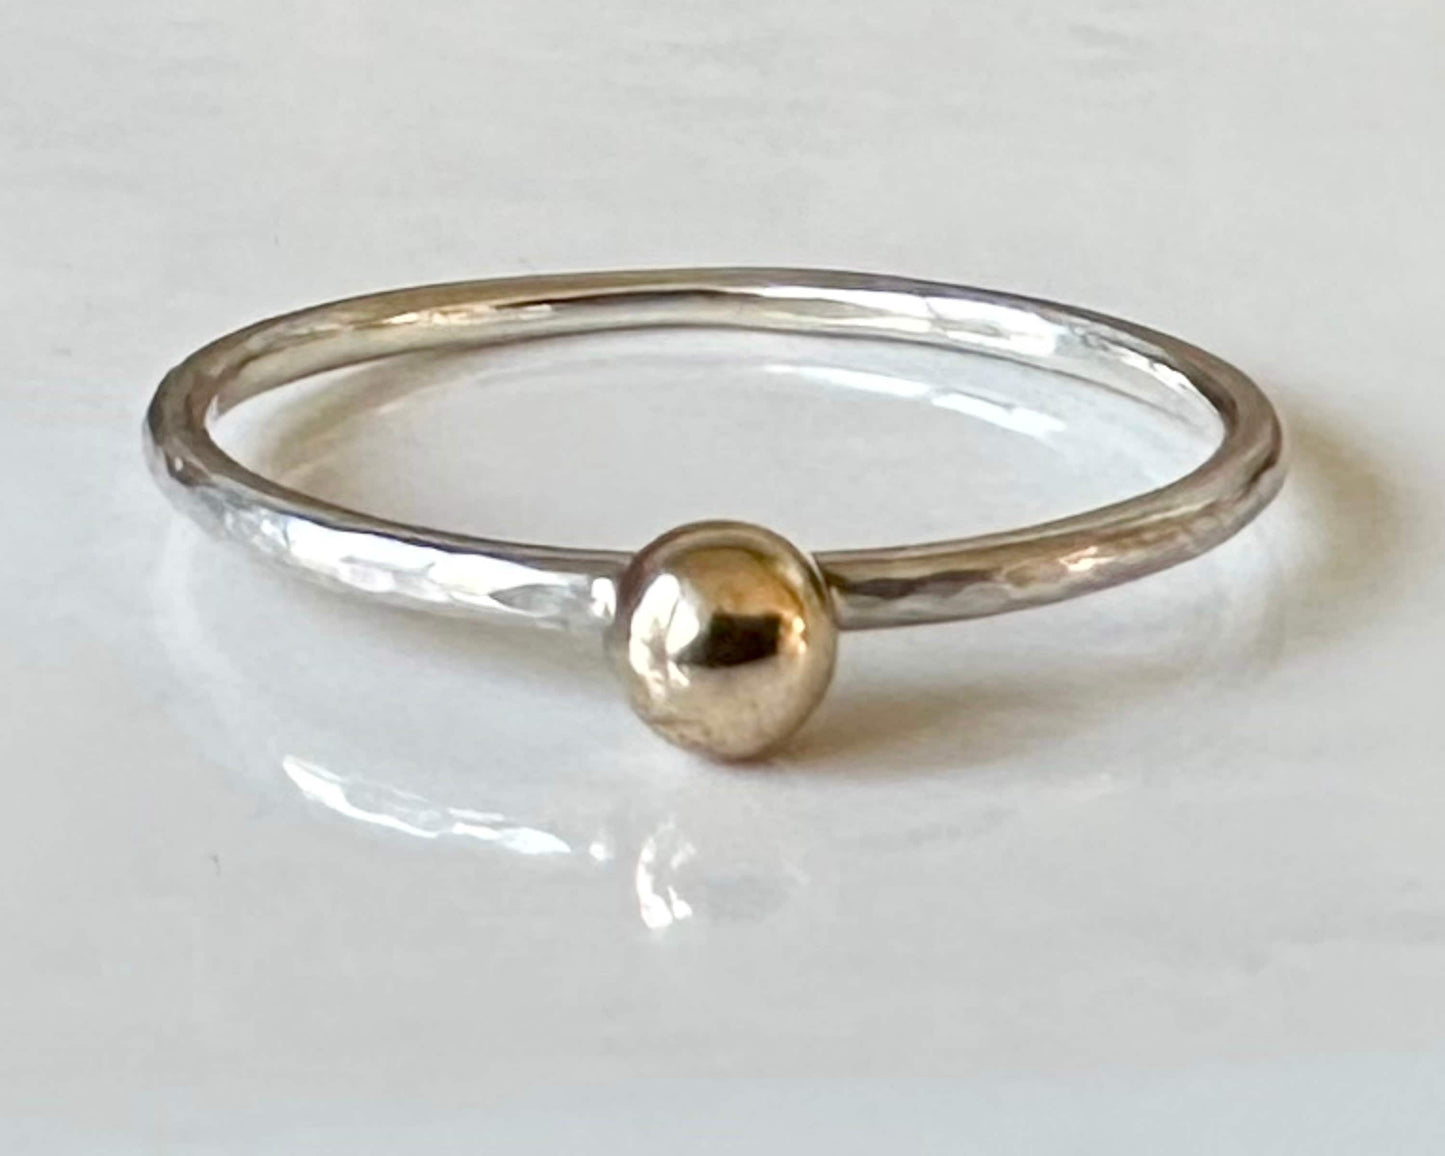 Set of Two Skinny Stacking Rings, 9ct Gold Nugget on 1.2mm 925 Sterling Silver Ring and 925 Sterling Silver Nugget on 1.2mm 9ct Gold Ring